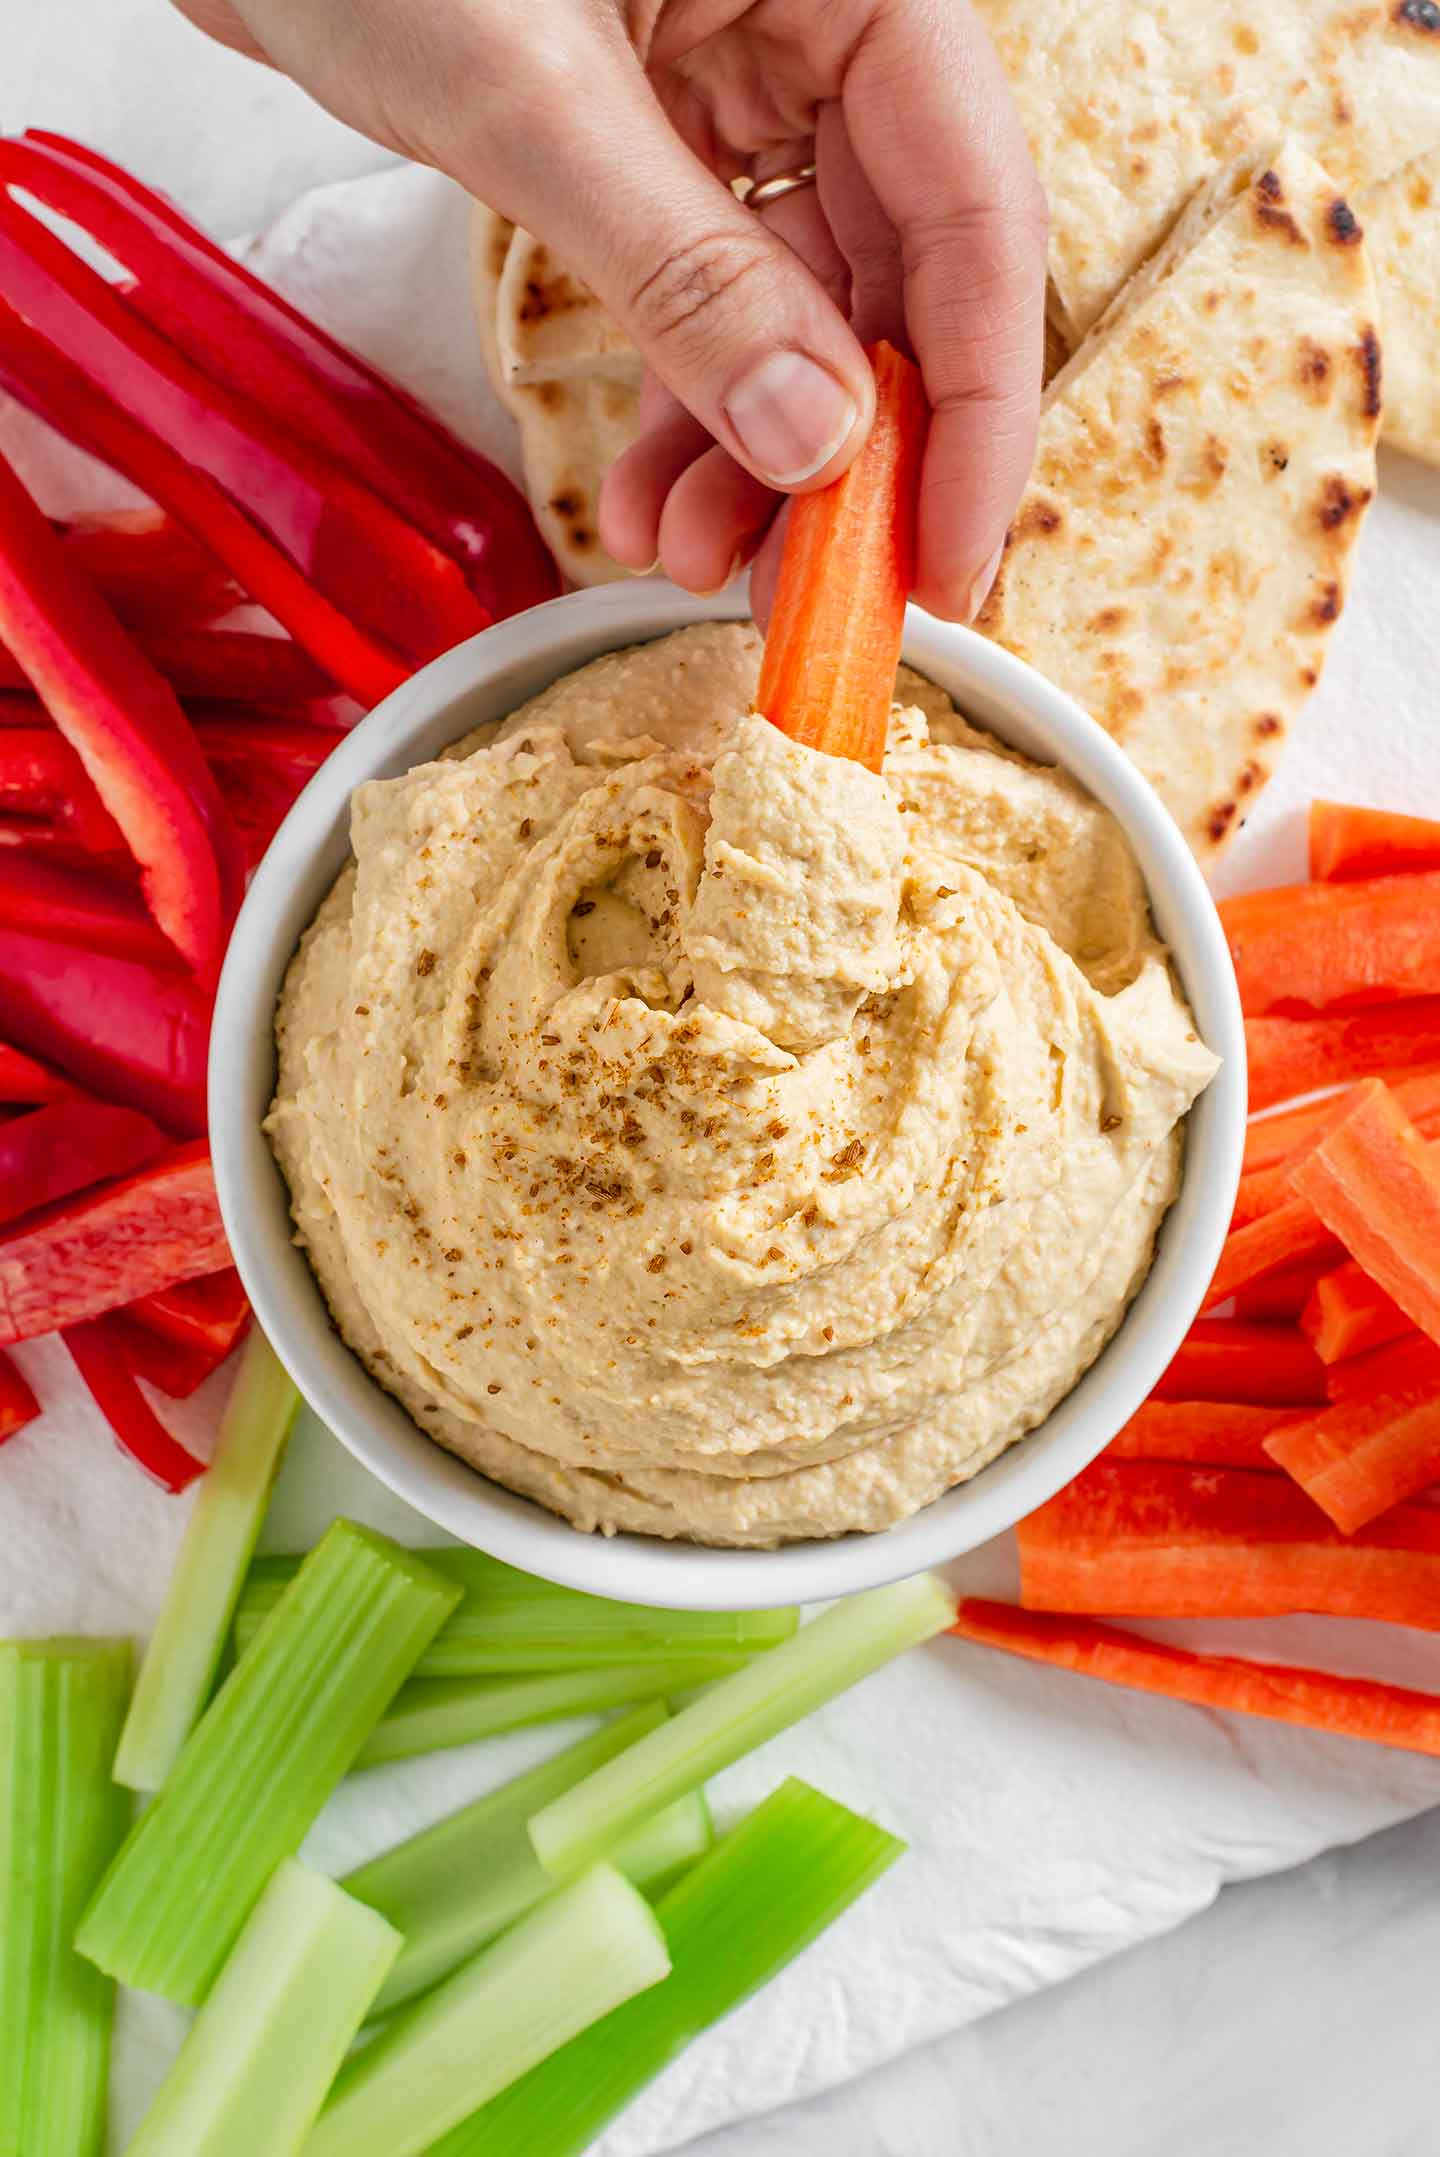 Top down view of a bowl filled with easy creamy homemade hummus sprinkled with cumin. A hand holding a carrot stick scoops into the hummus and carrots, red peppers, celery, and naan bread surround the hummus bowl.